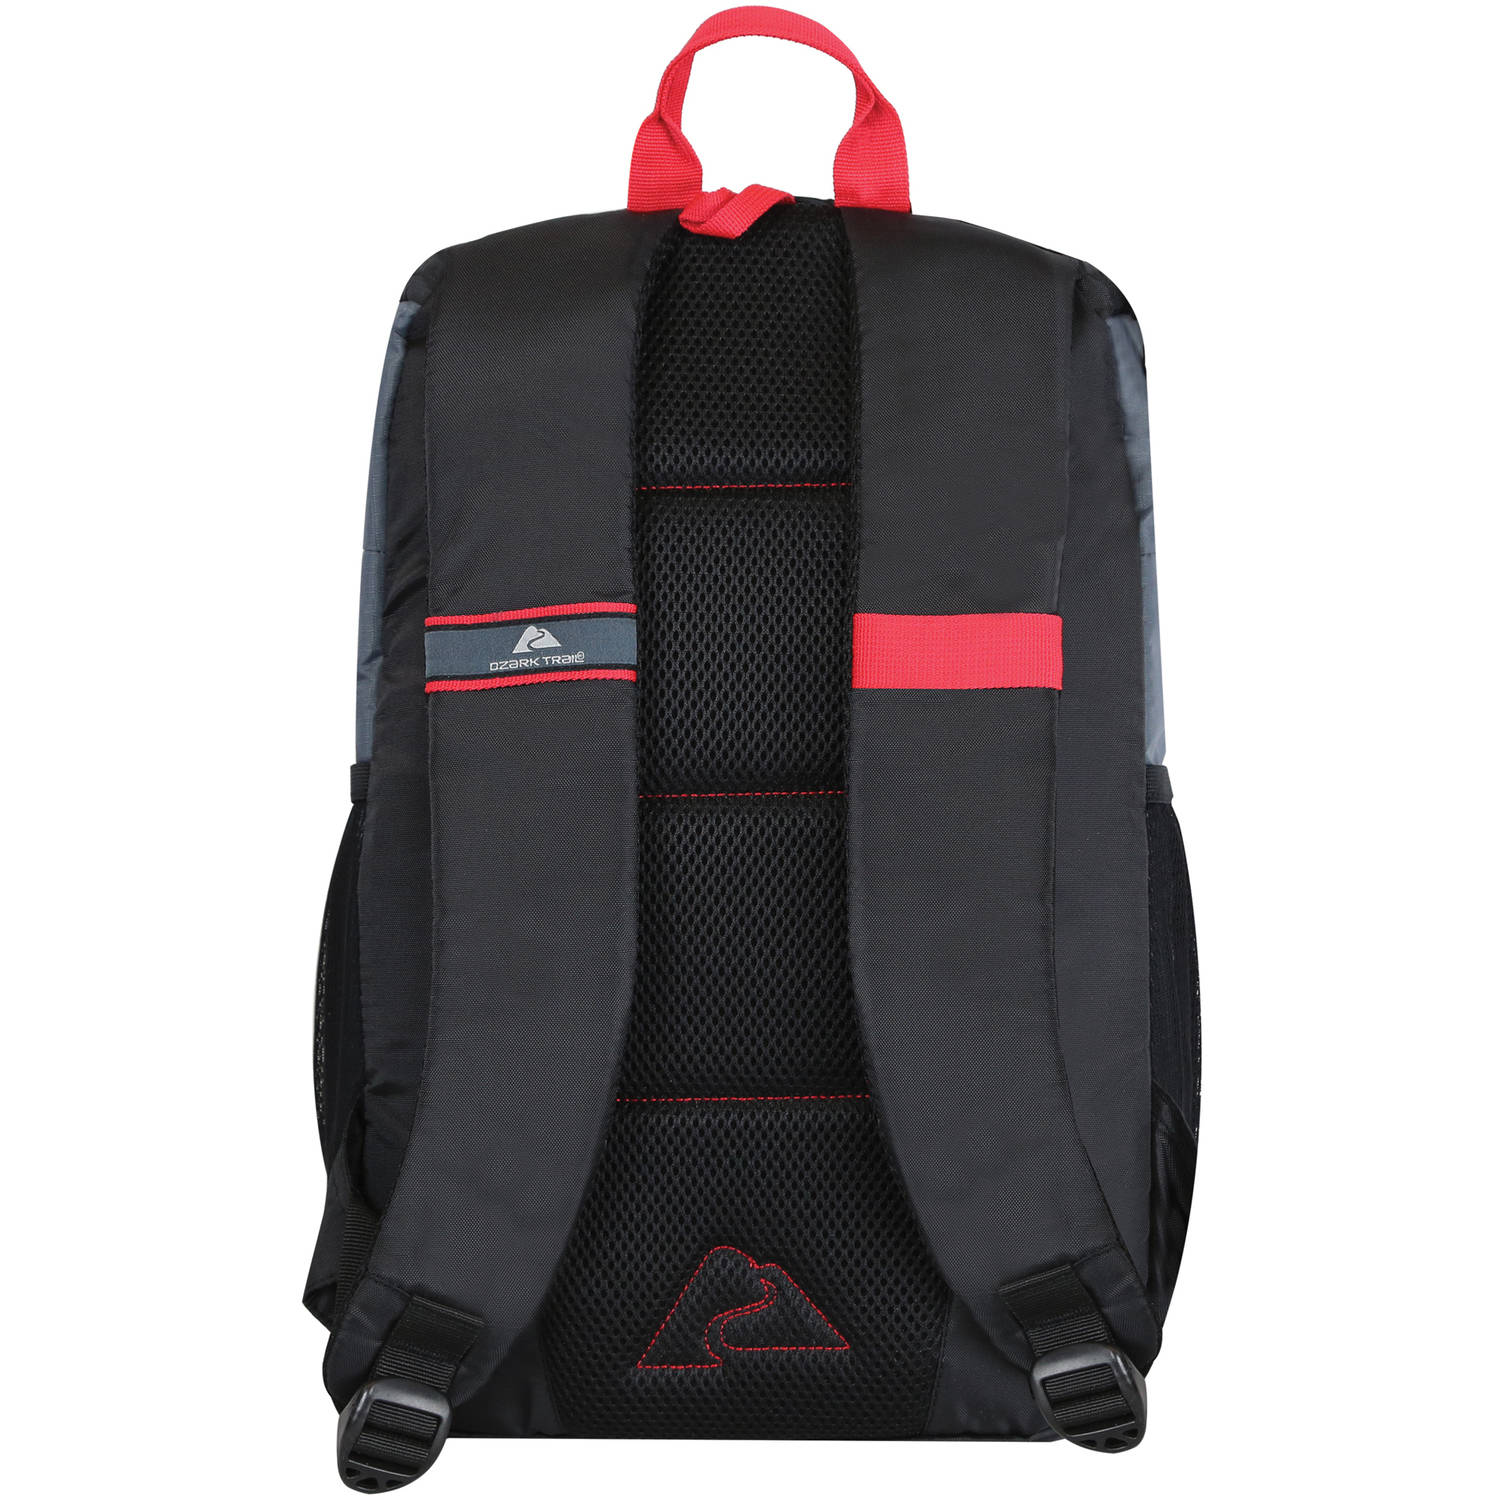 Ozark Trail 24-Can Thermal Insulated Soft Side Cooler Backpack, Black - image 3 of 5